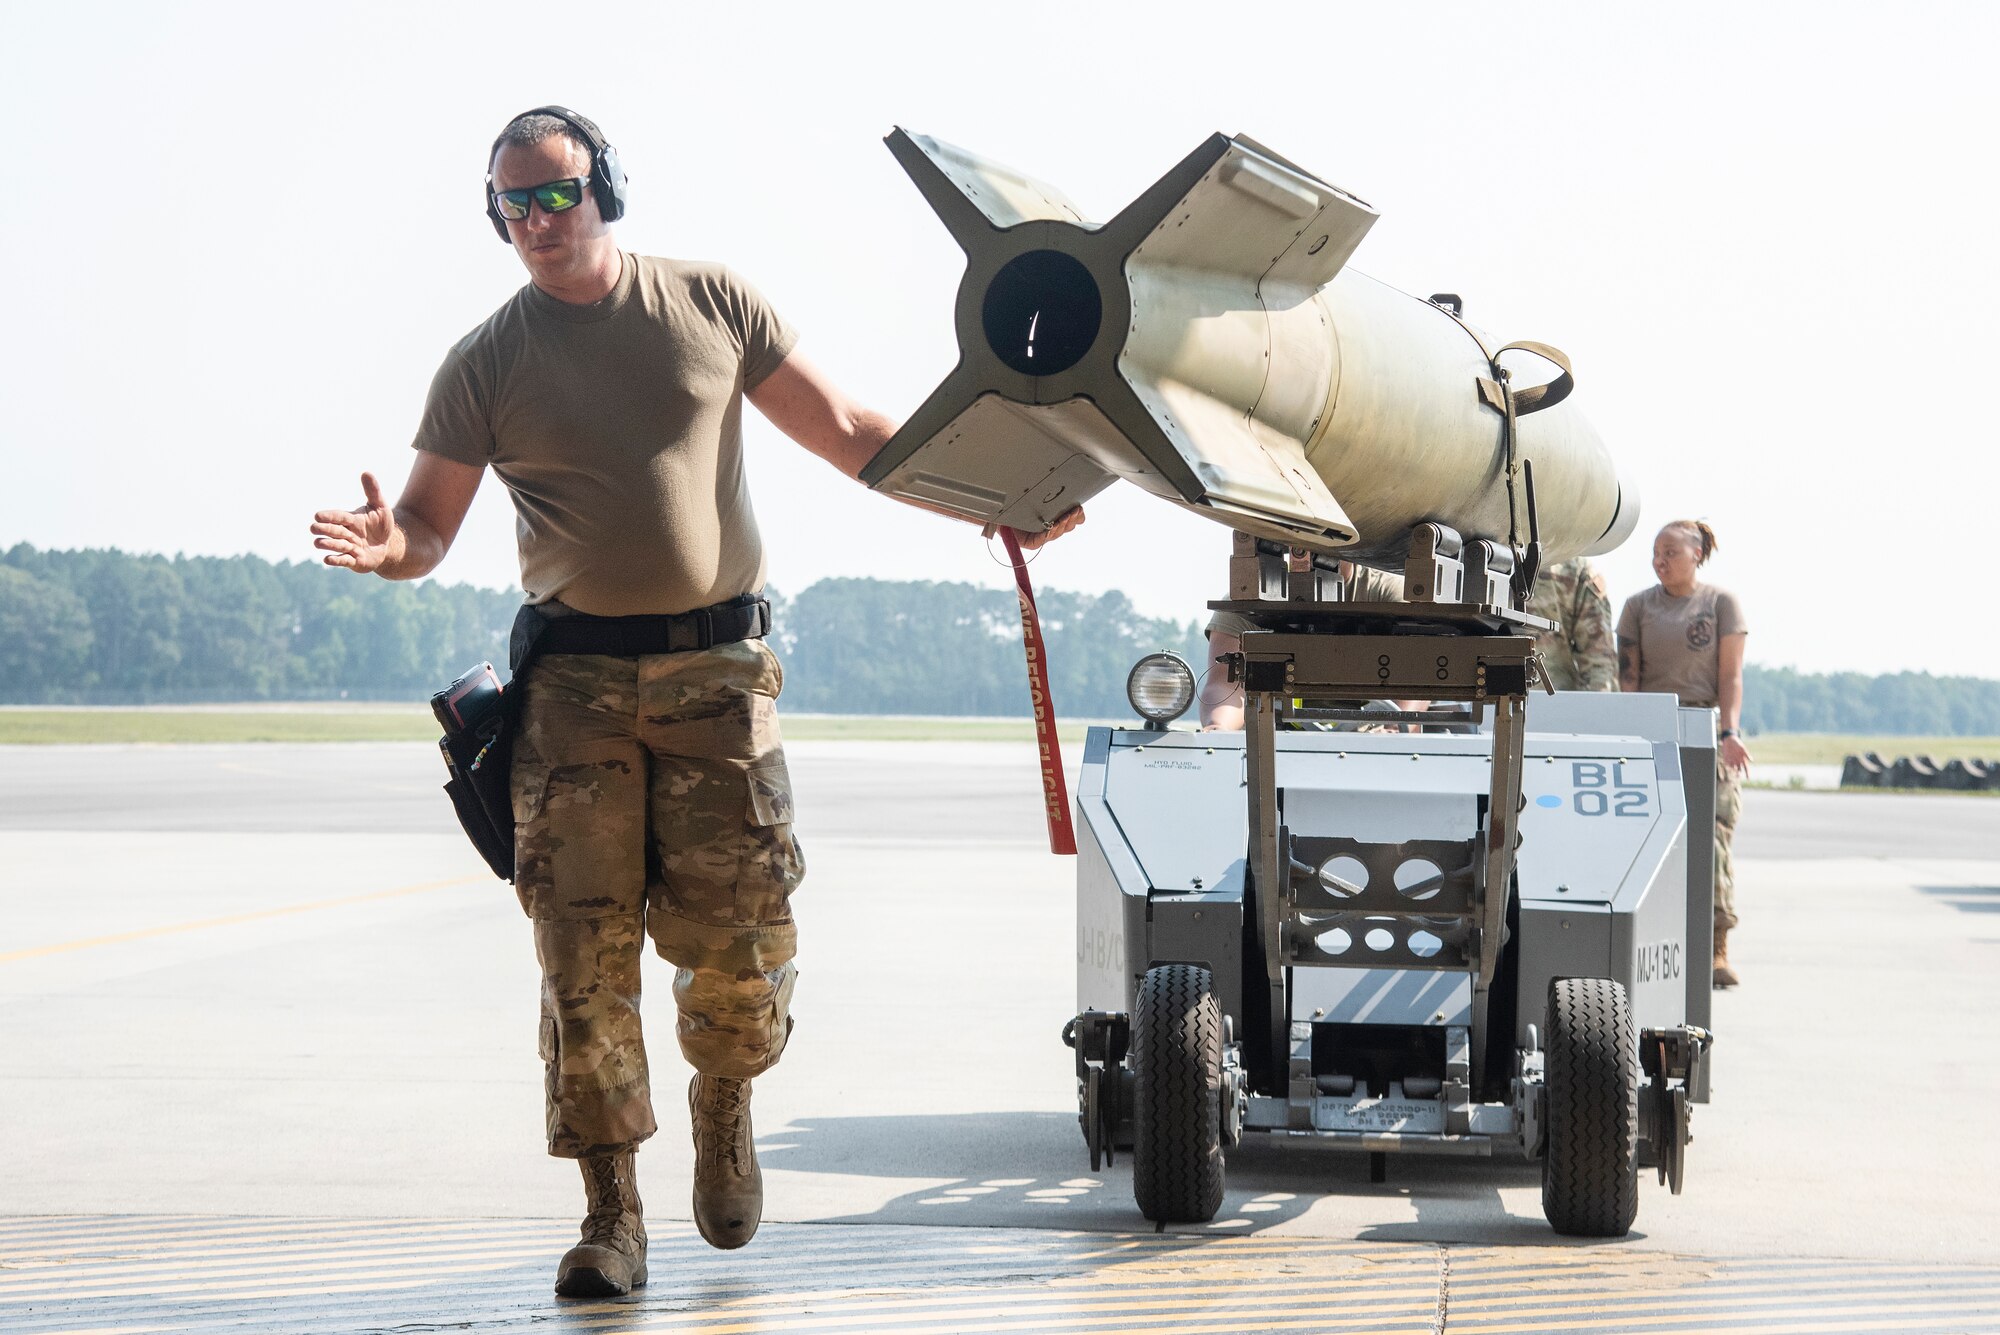 Staff Sgt. Jared Branch, 336th Fighter Generation Squadron weapons load crew chief leads an unarmed practice [GBU-10 Paveway II] munition into a hangar bay.